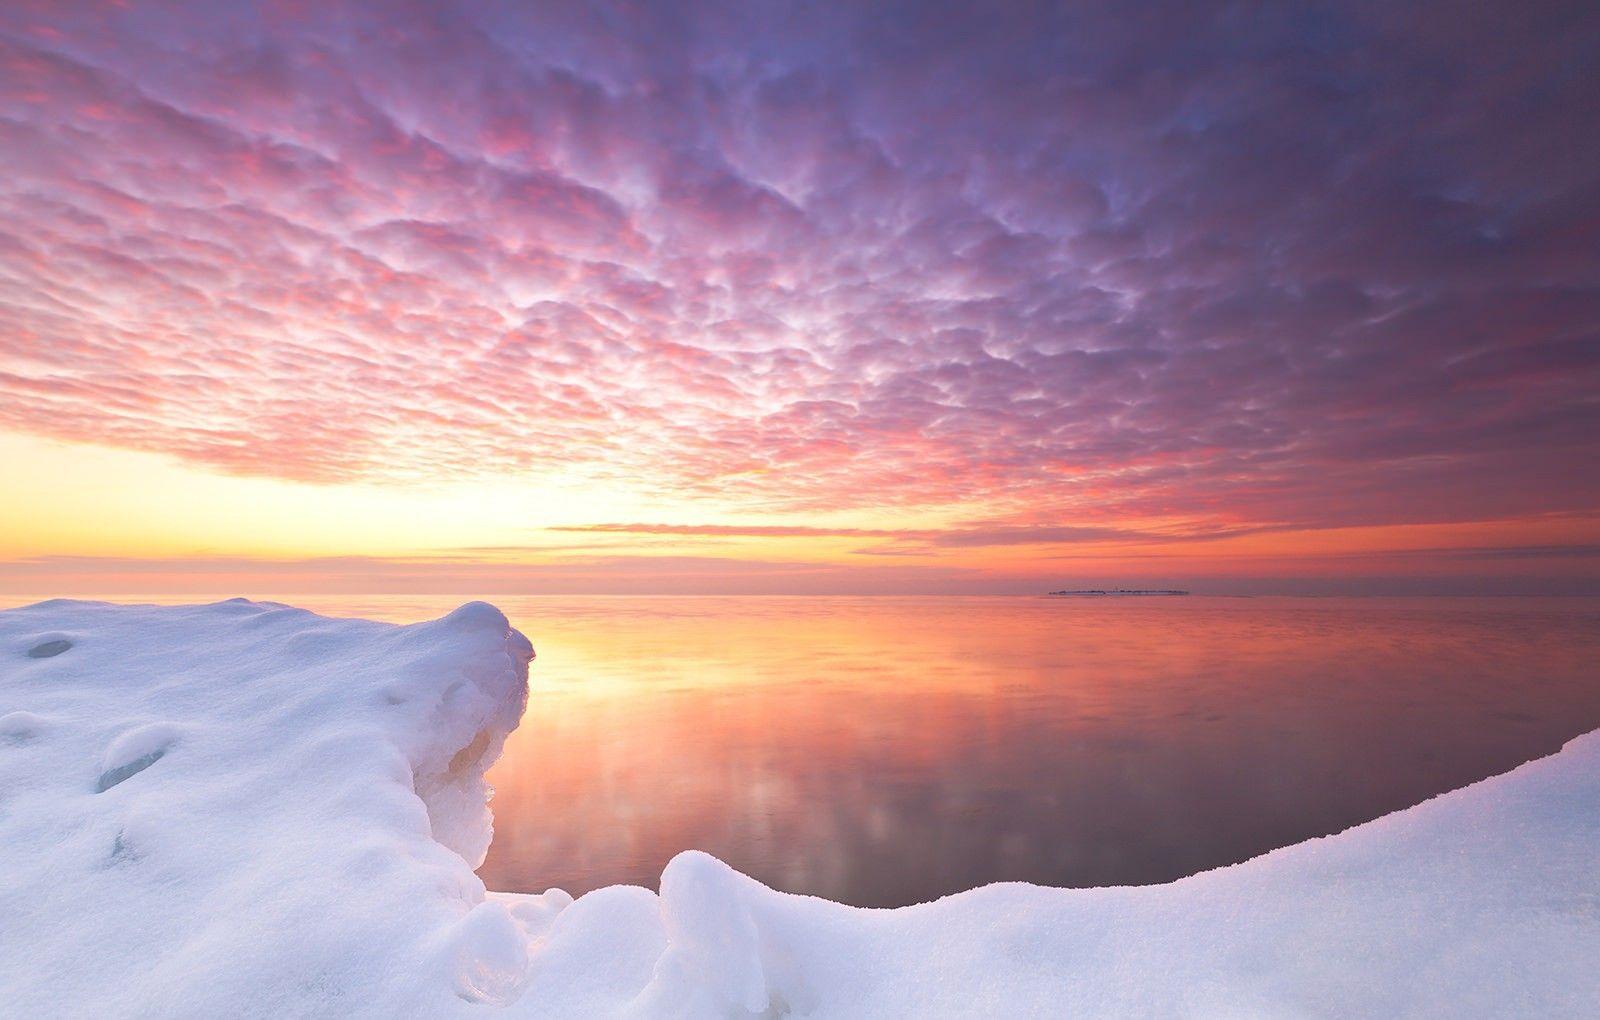 Pink sunset in Antarctica wallpaper and image